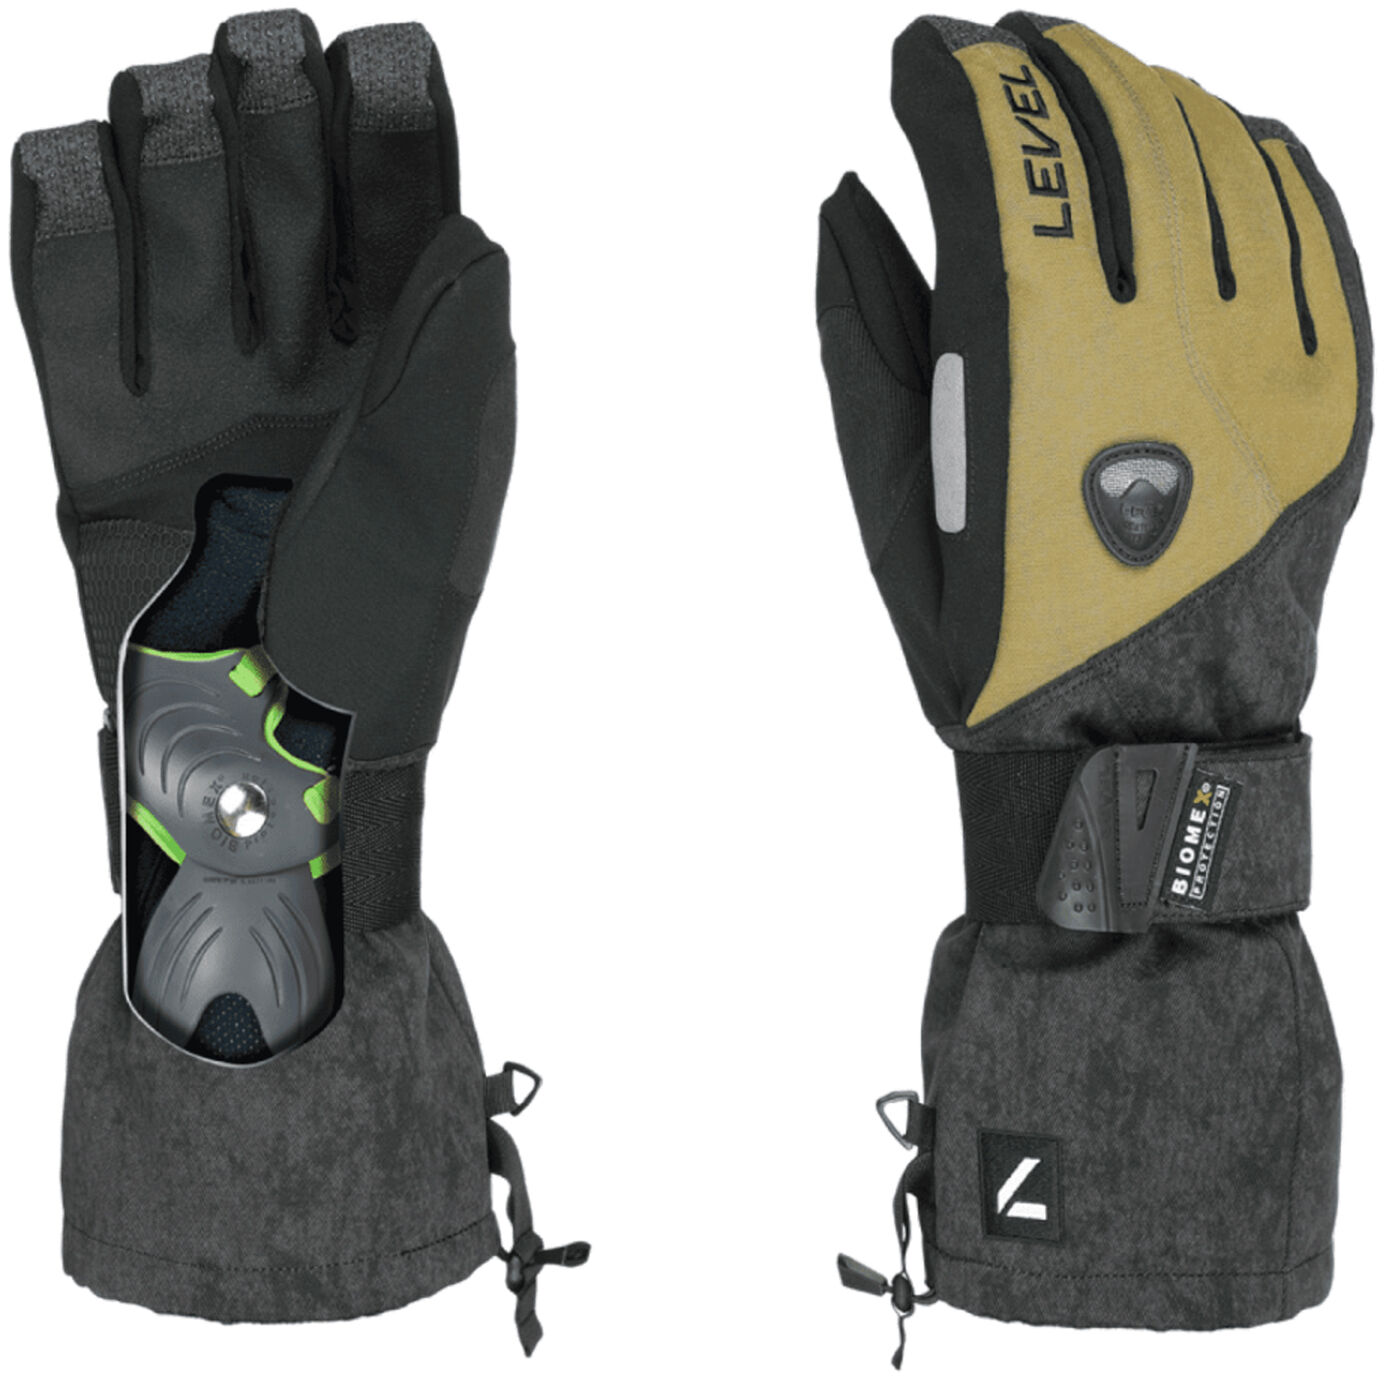 LEVEL FLY GLOVE OLIVE M-L